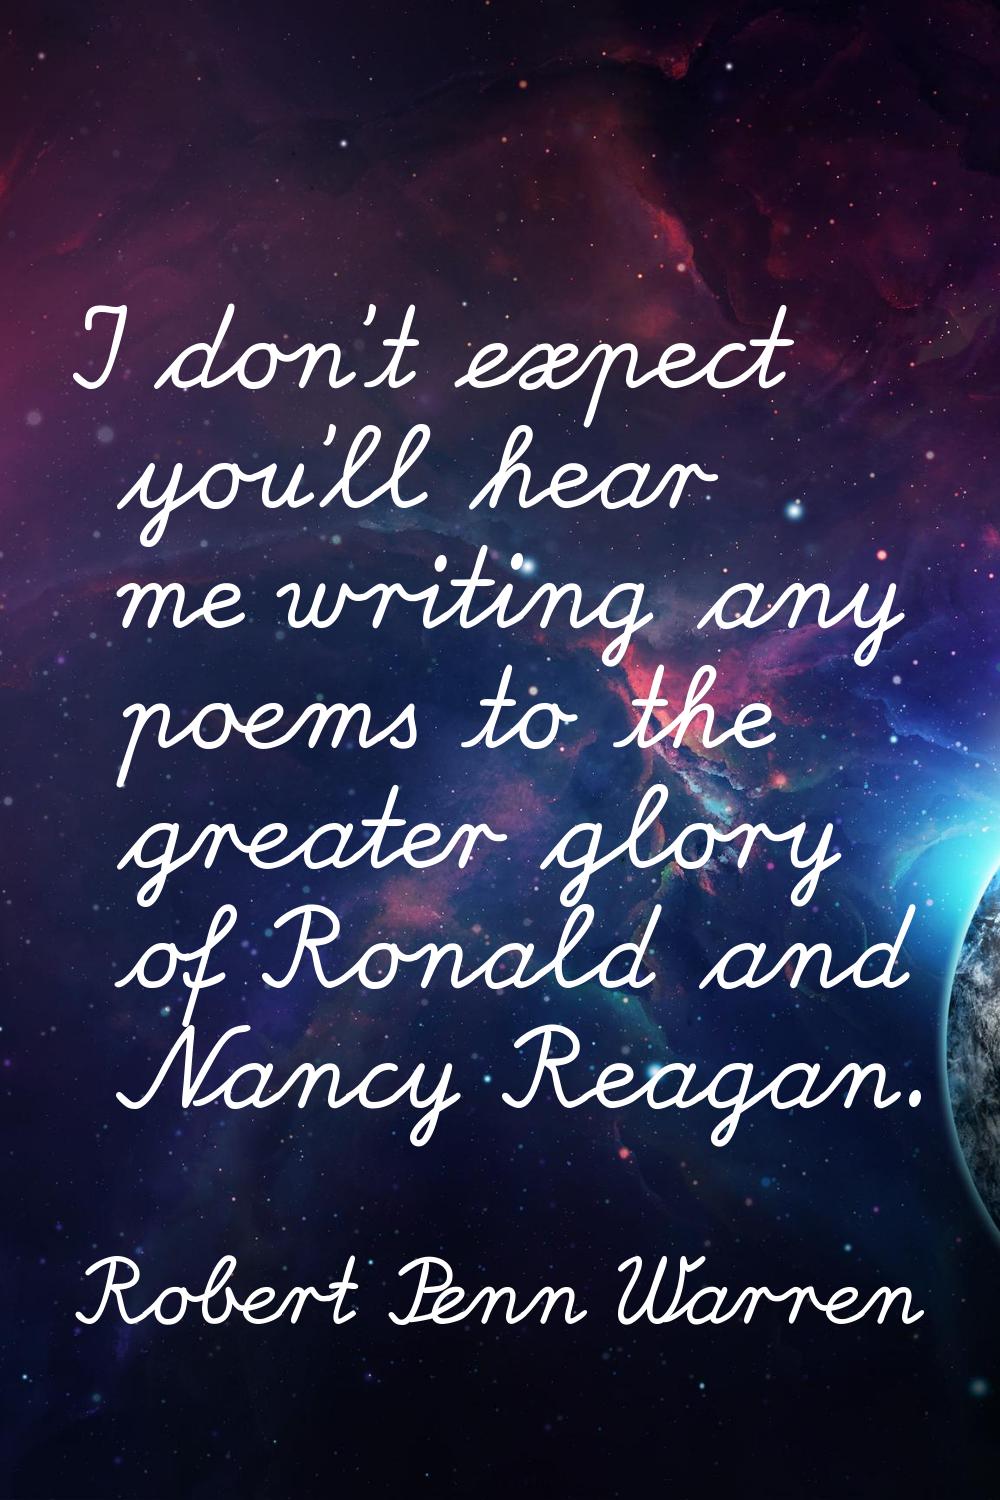 I don't expect you'll hear me writing any poems to the greater glory of Ronald and Nancy Reagan.